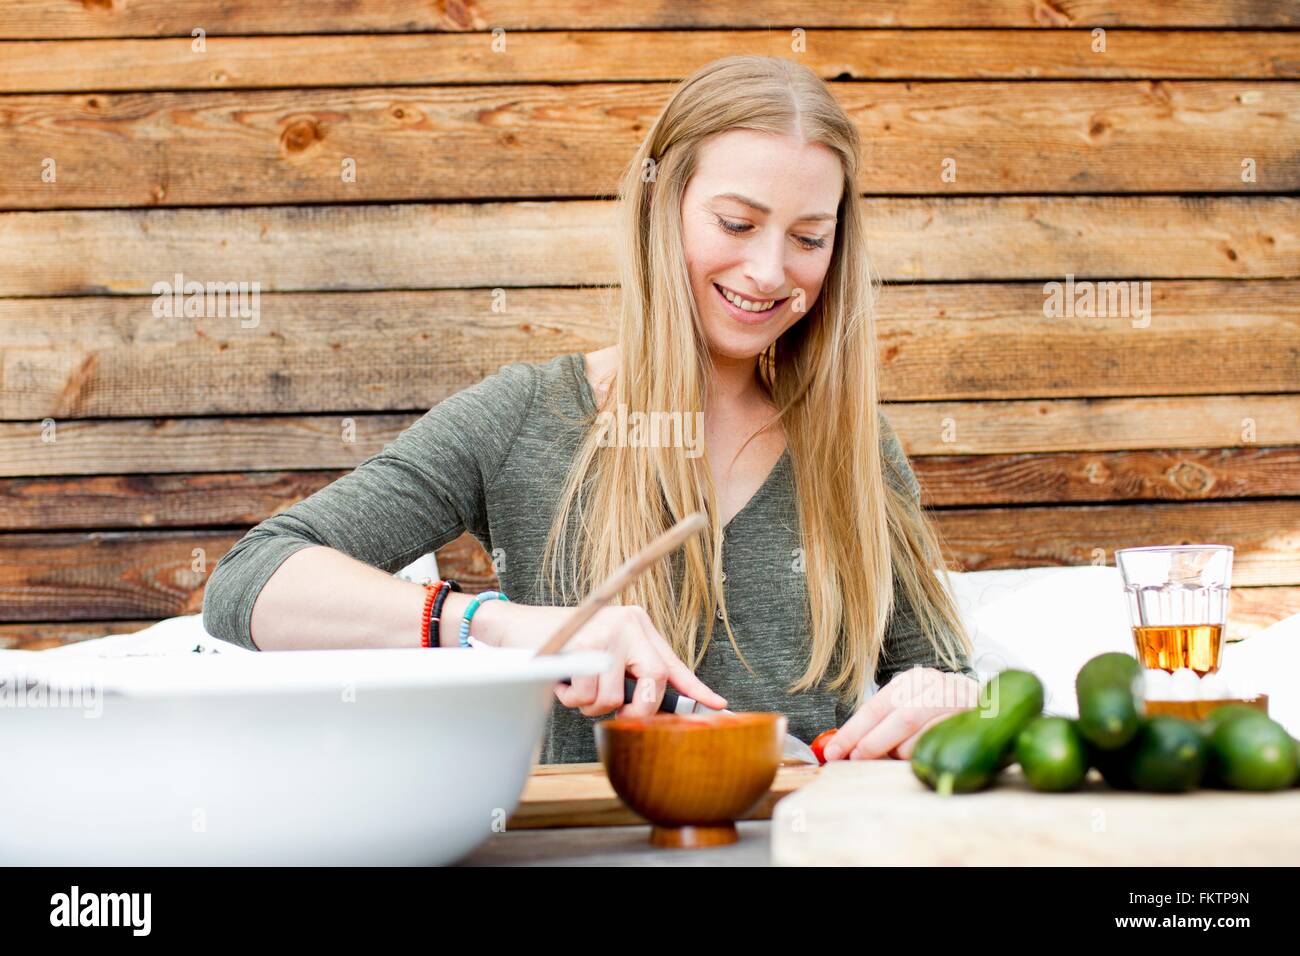 Mid adult woman preparing food at table outdoors Stock Photo